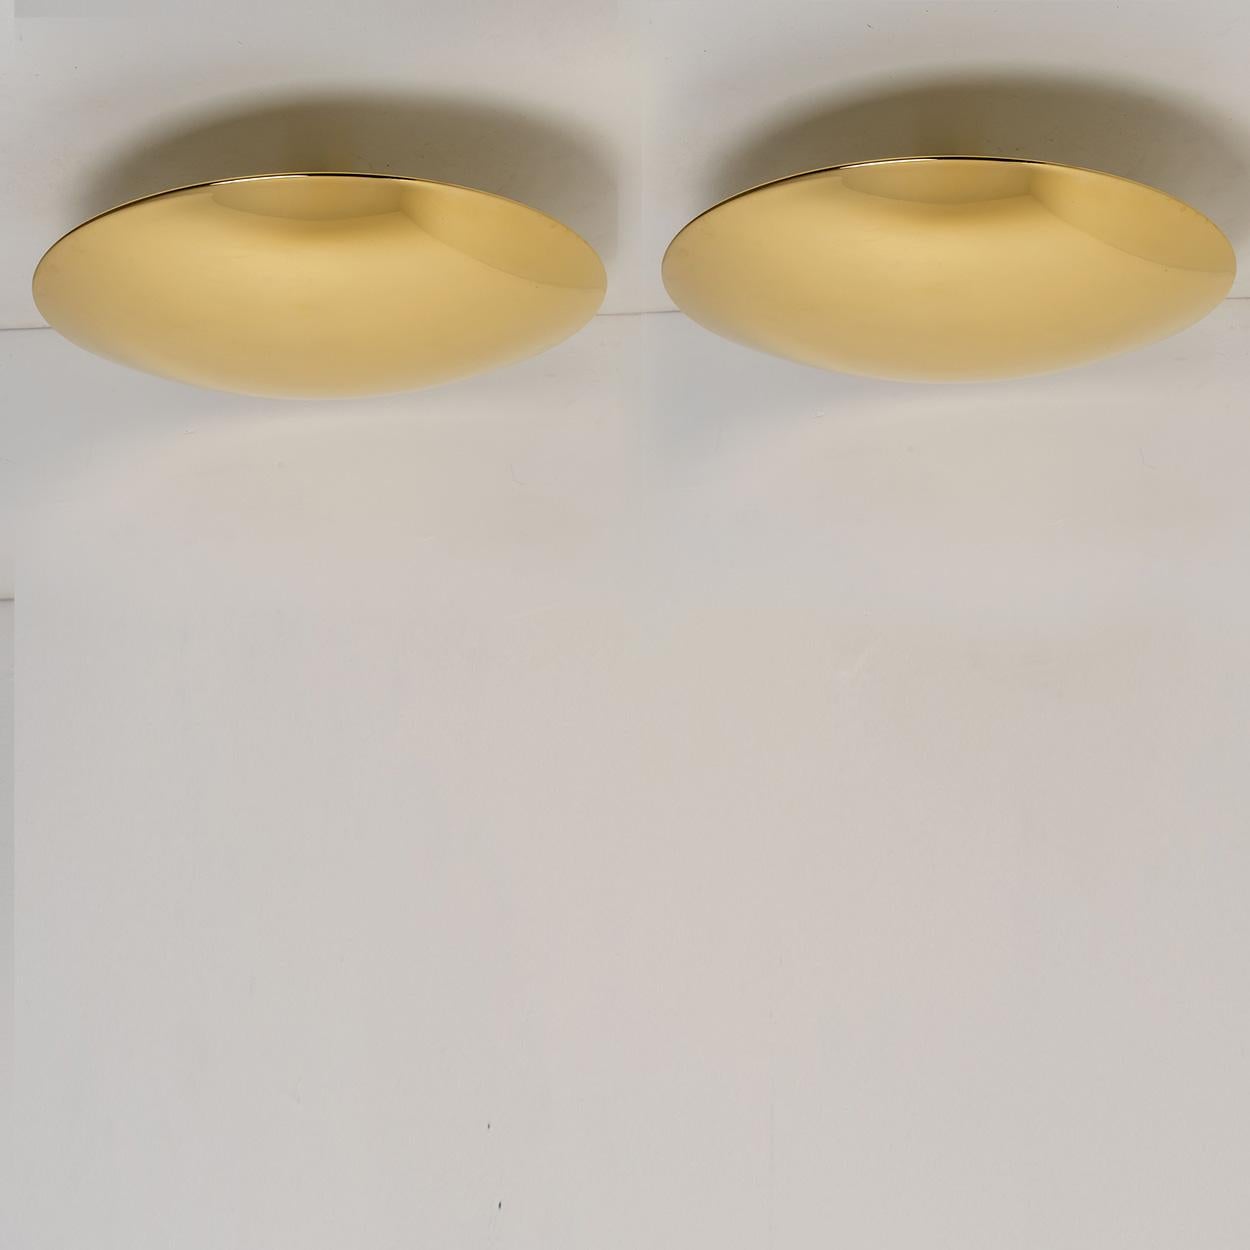 1 of the 2 Large Florian Schulz Brass Flushmount Ceiling /Wall Lights, 1970 For Sale 6